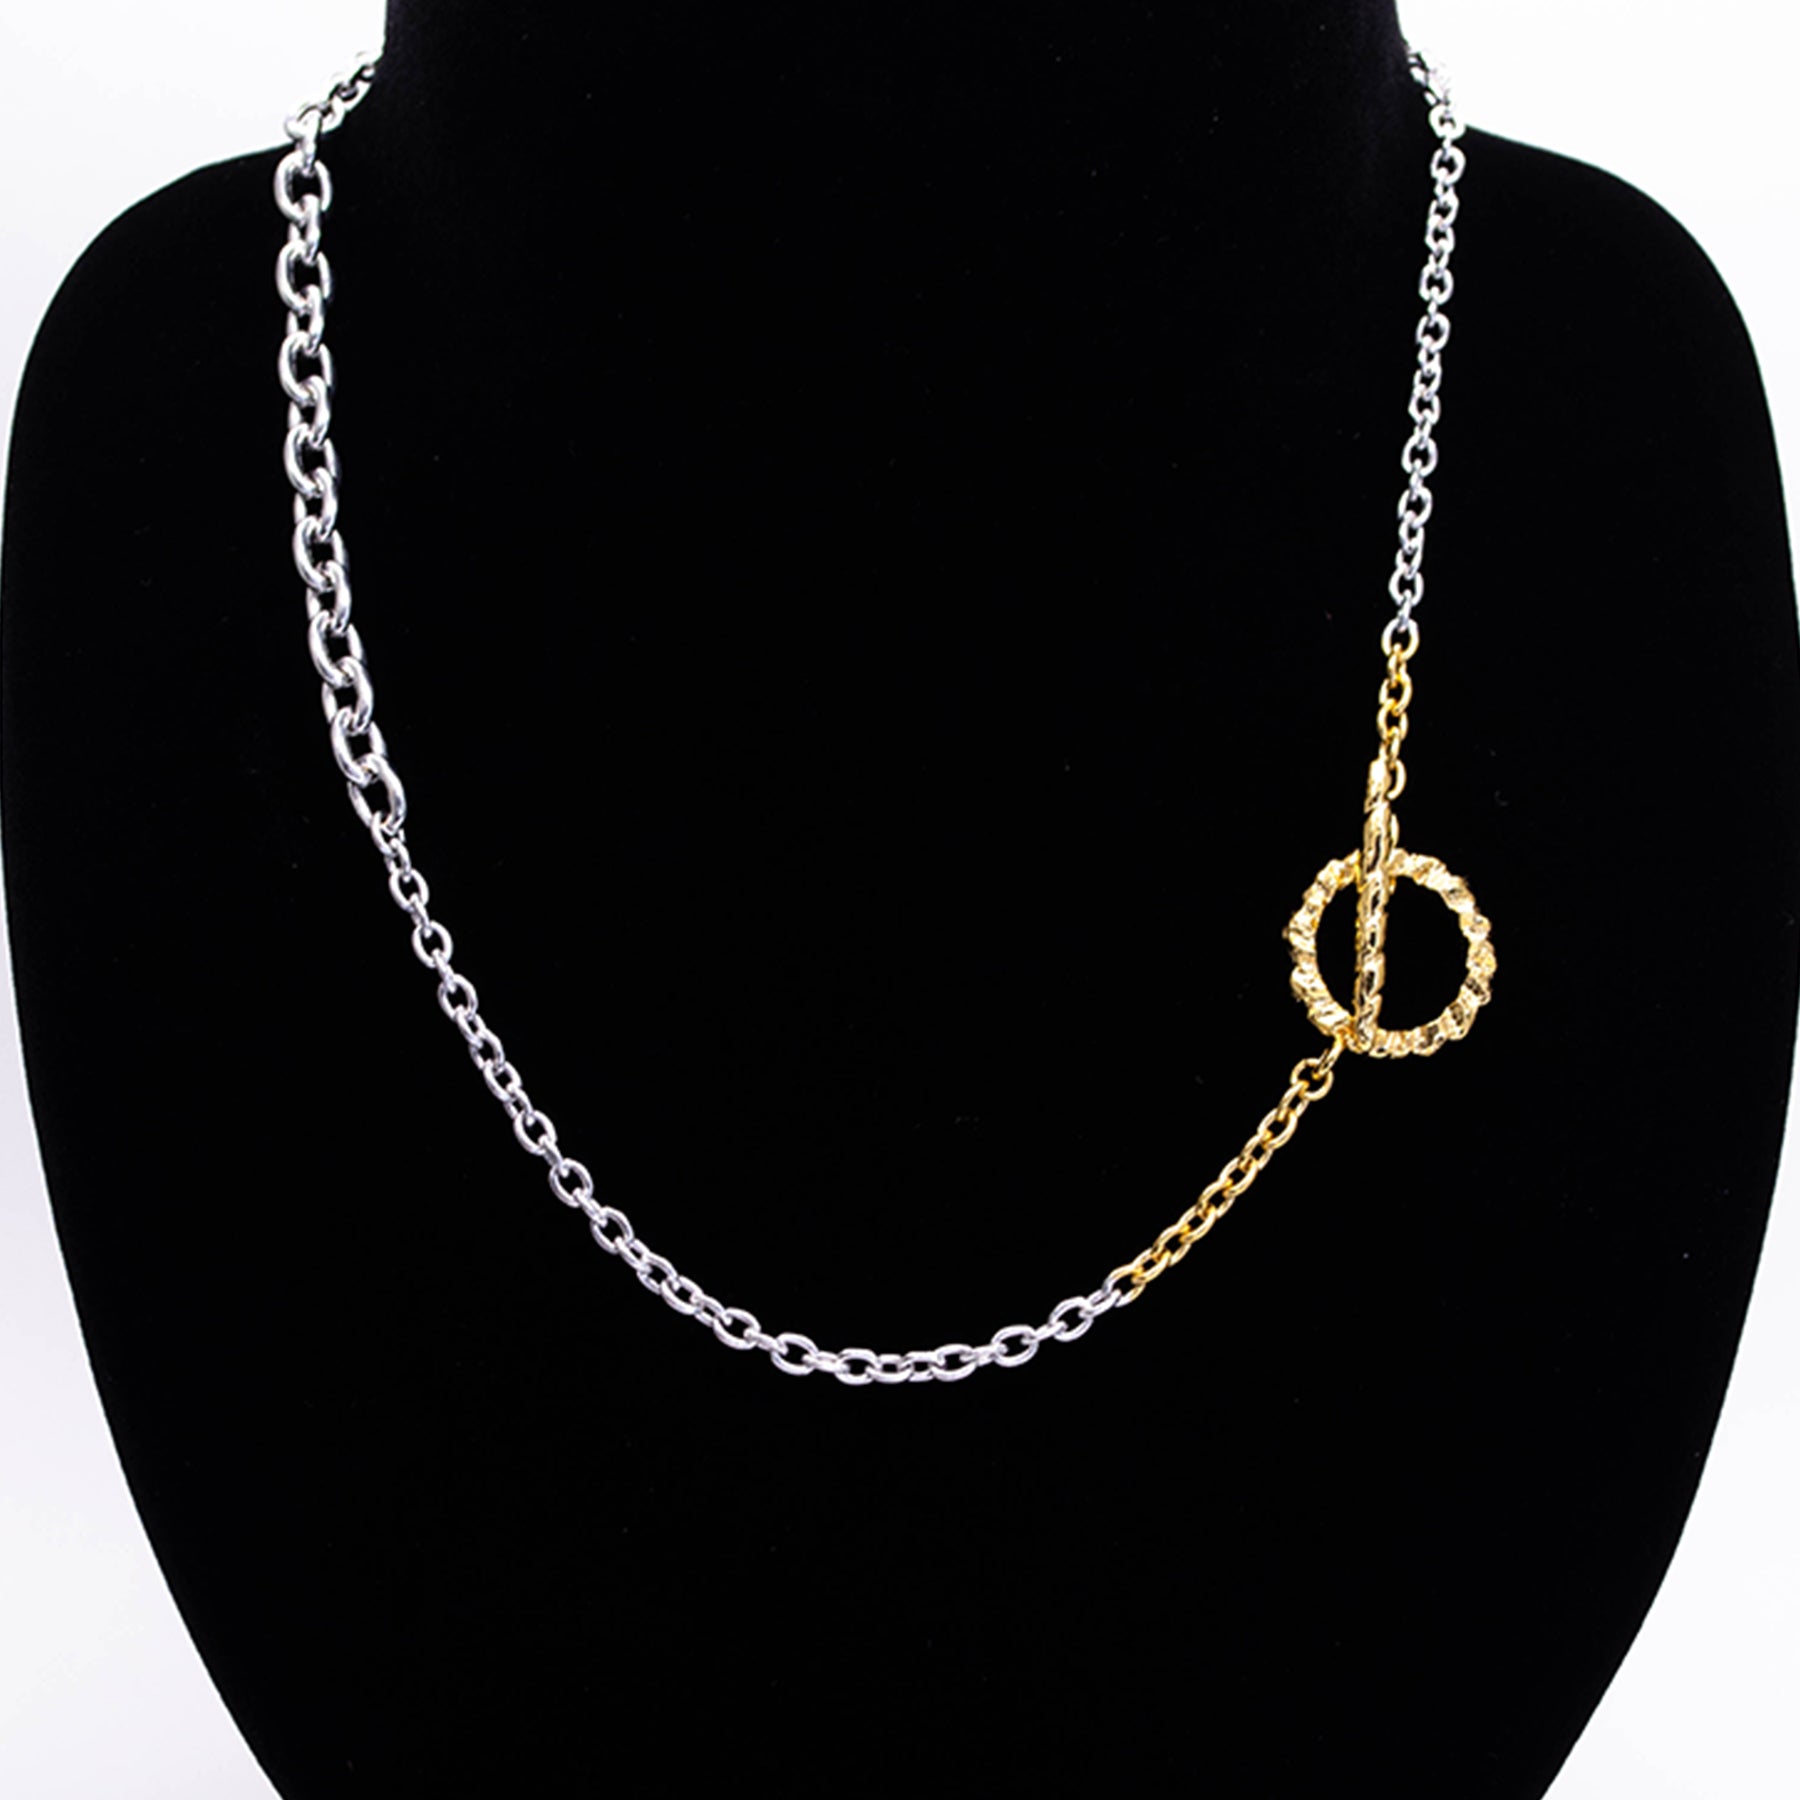 【BUNNEY】ネックレス Gradient Chain Necklace